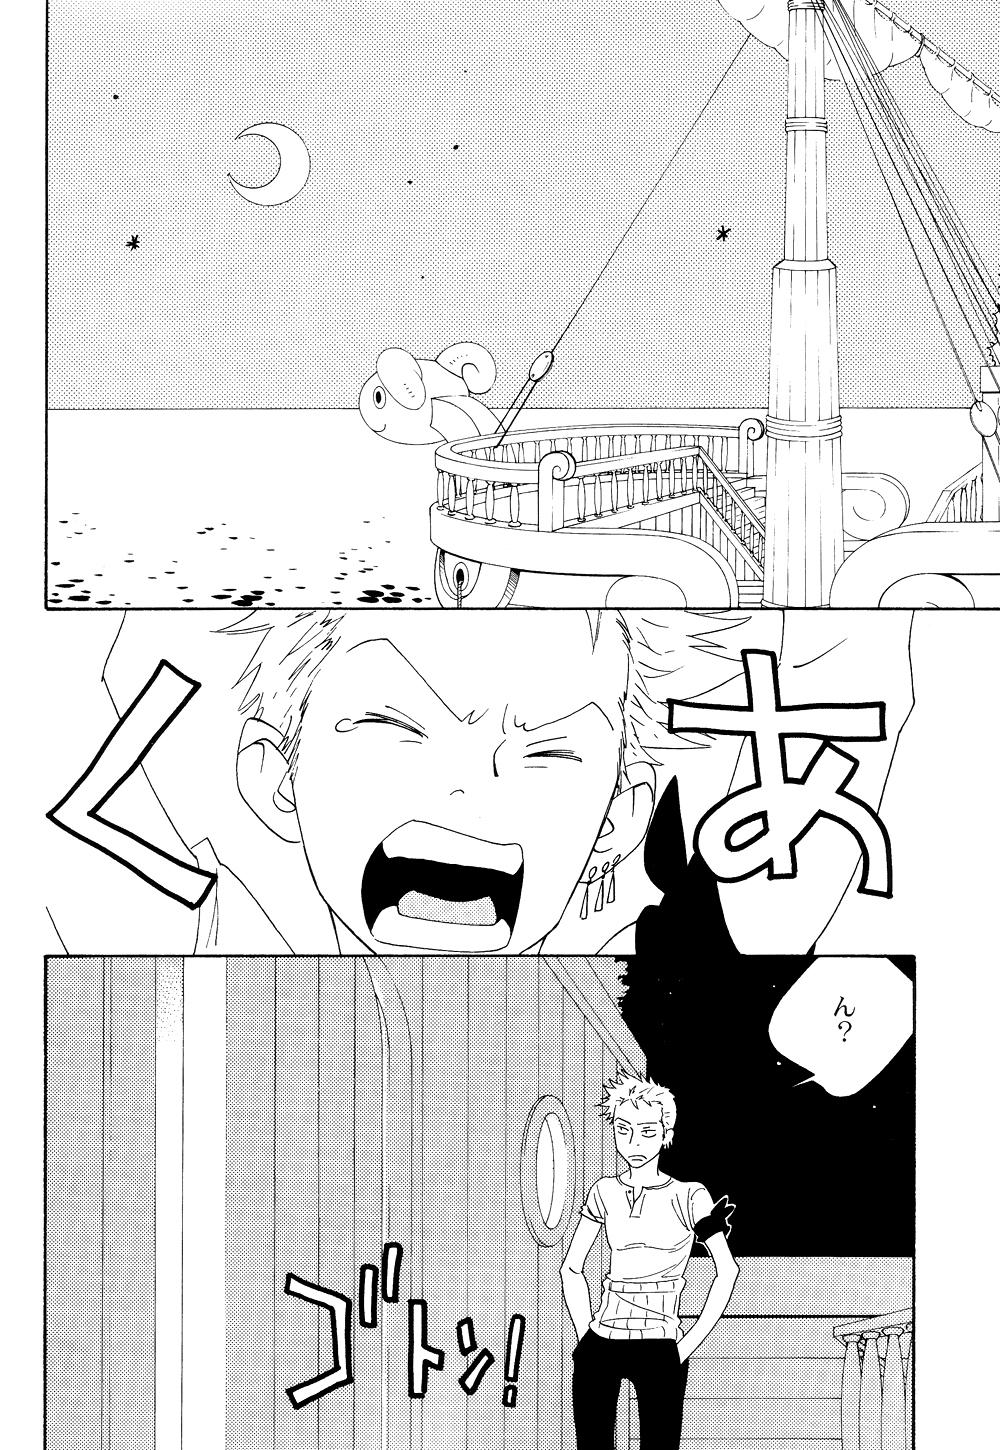 Thong Itazura na Hana - One piece Gay Party - Page 8